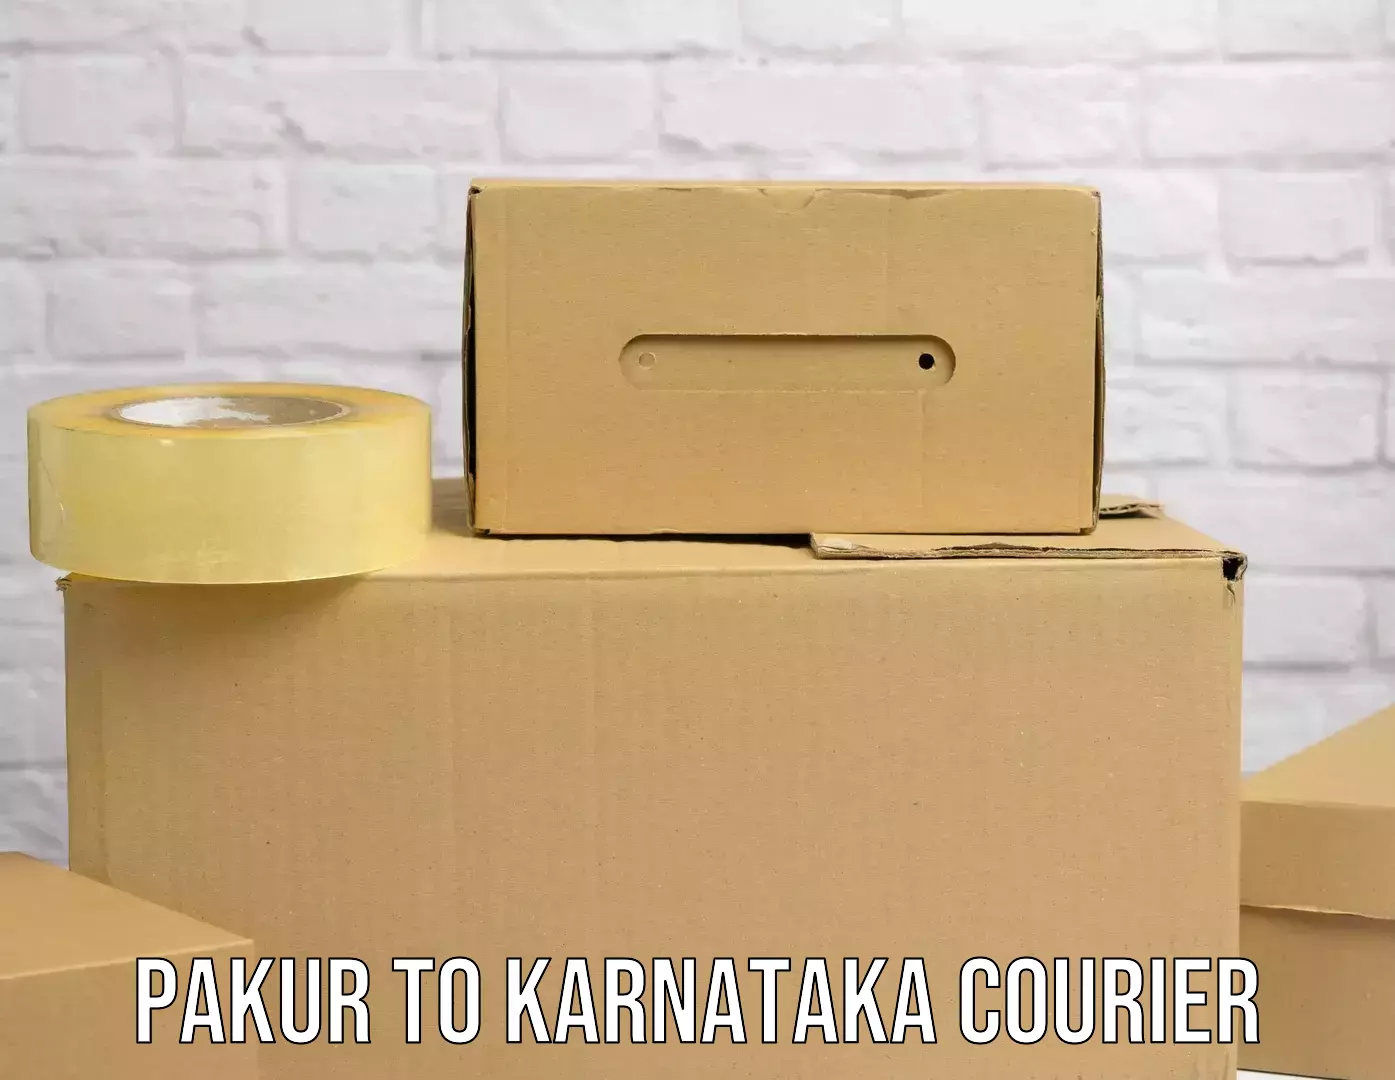 Supply chain delivery in Pakur to Karnataka